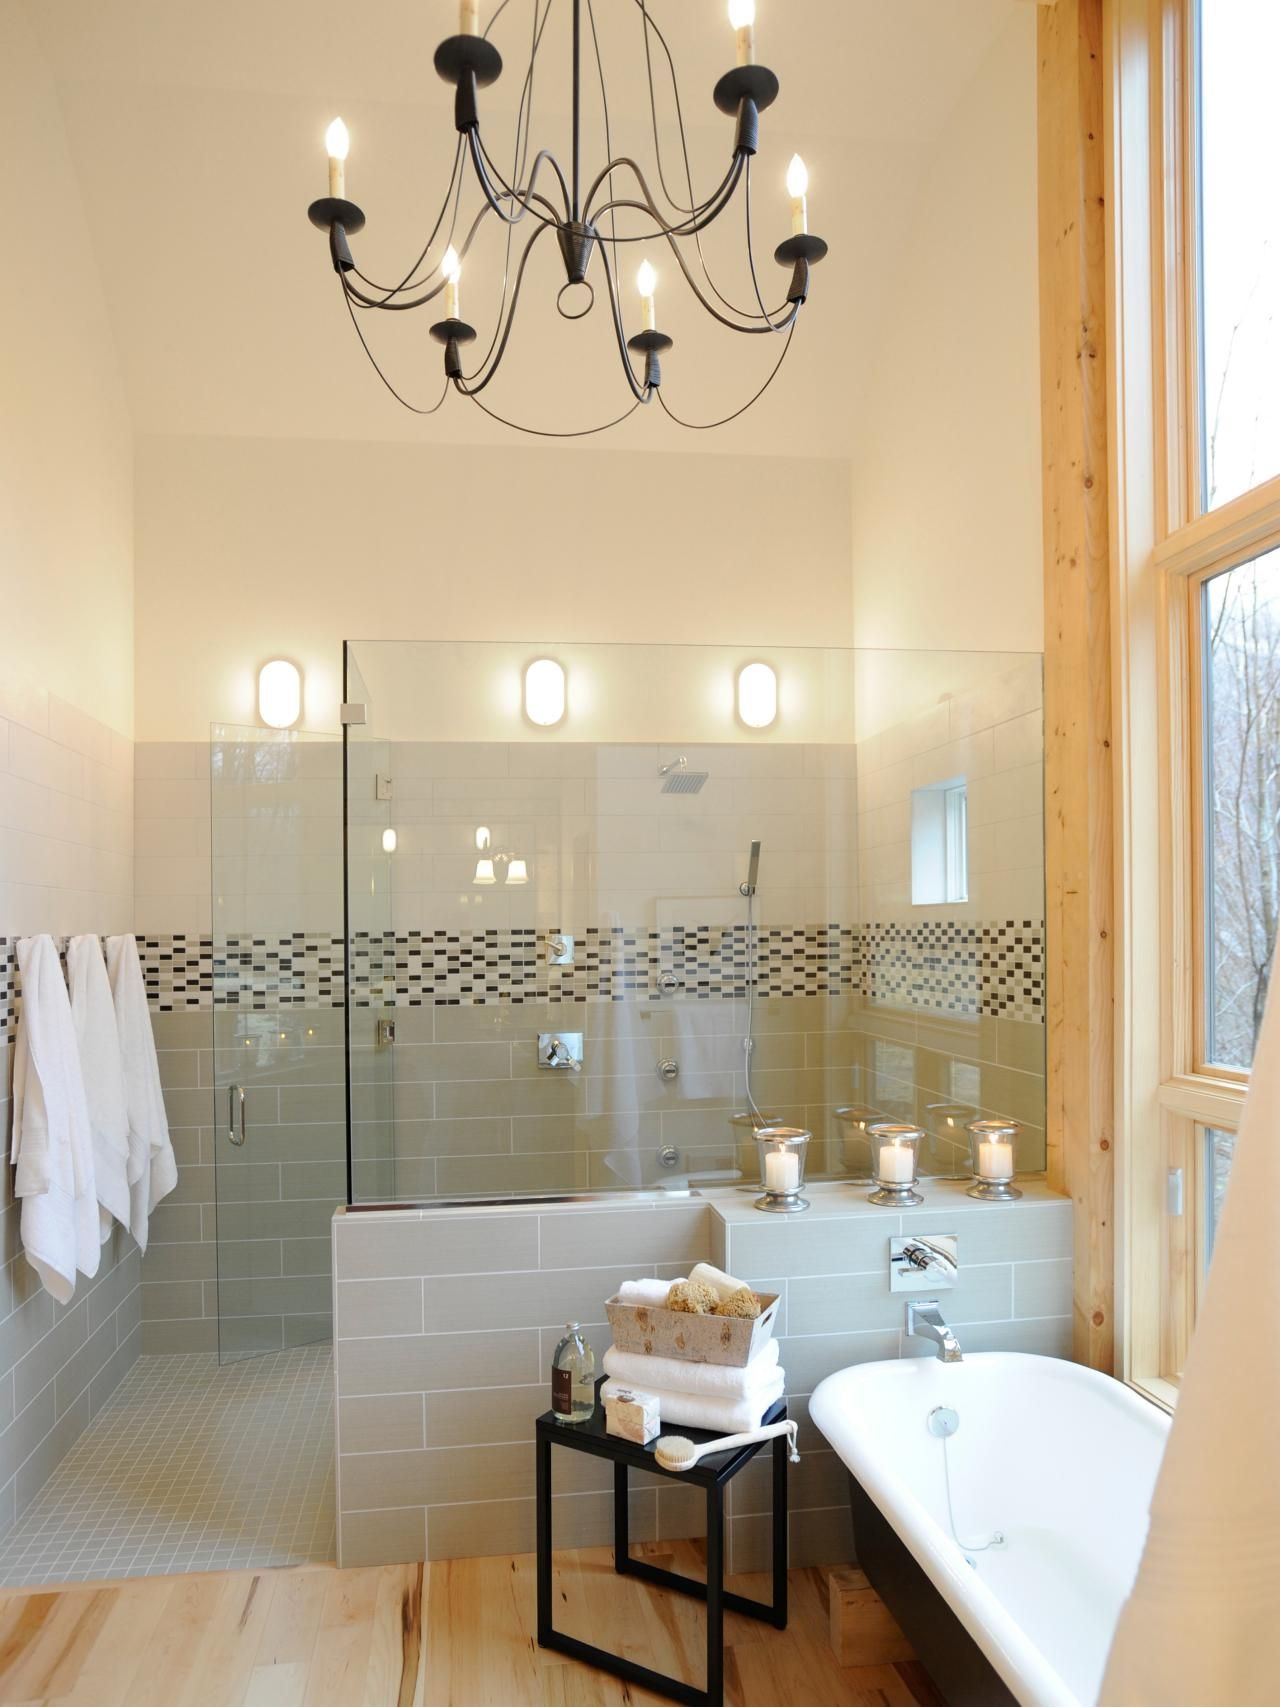 Small Chandeliers For Bathrooms Lightupmyparty In Mini Bathroom Chandeliers (View 12 of 12)